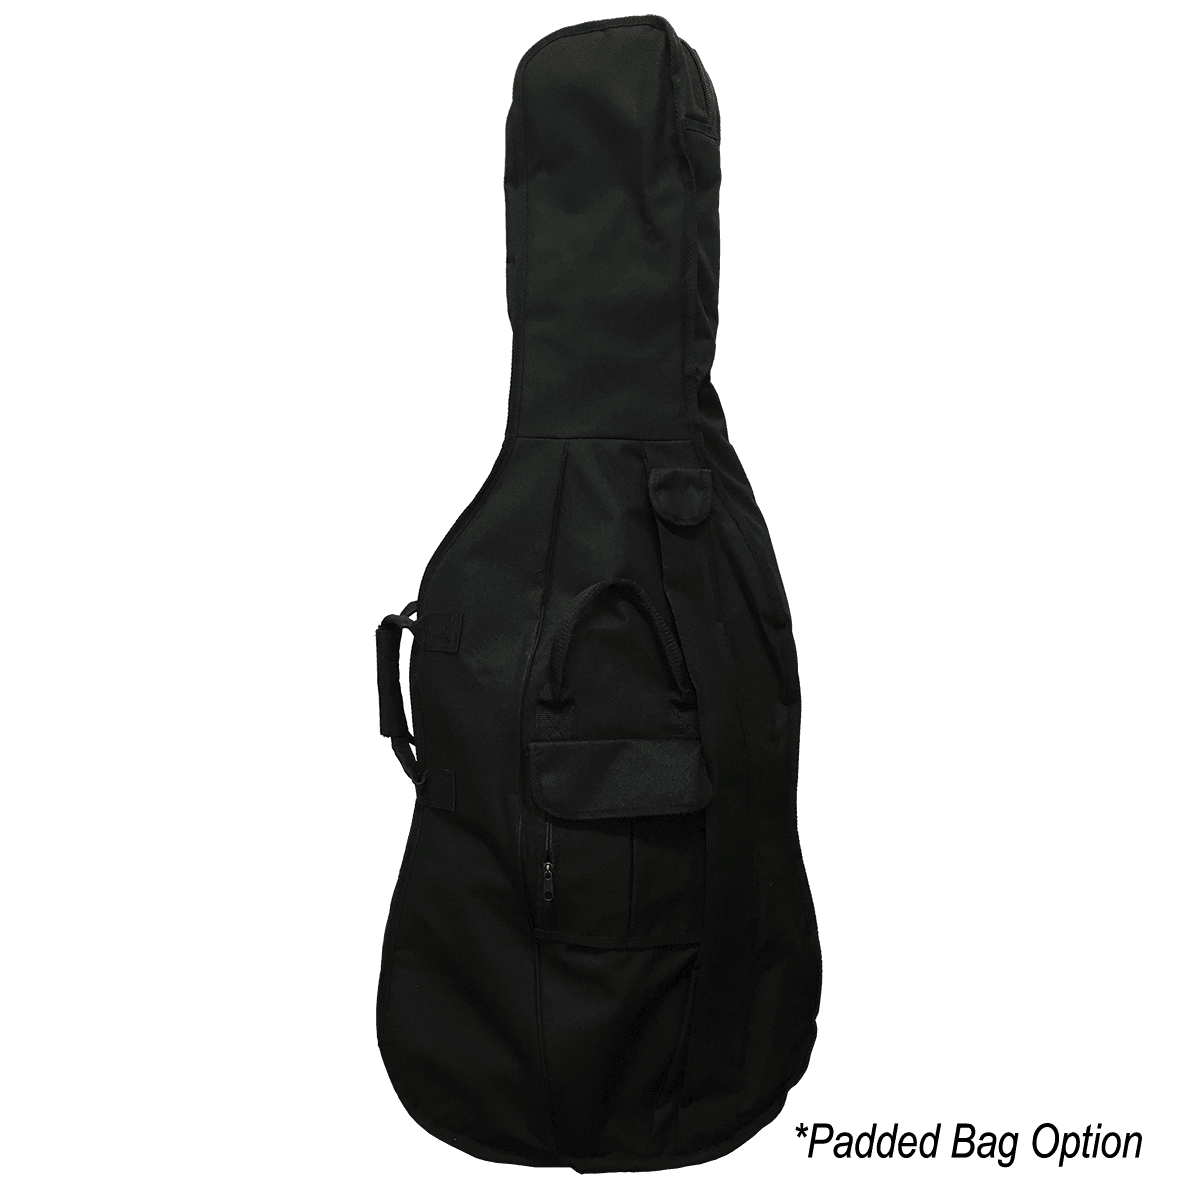 Vivo Student 4/4 Cello Outfit with Bag